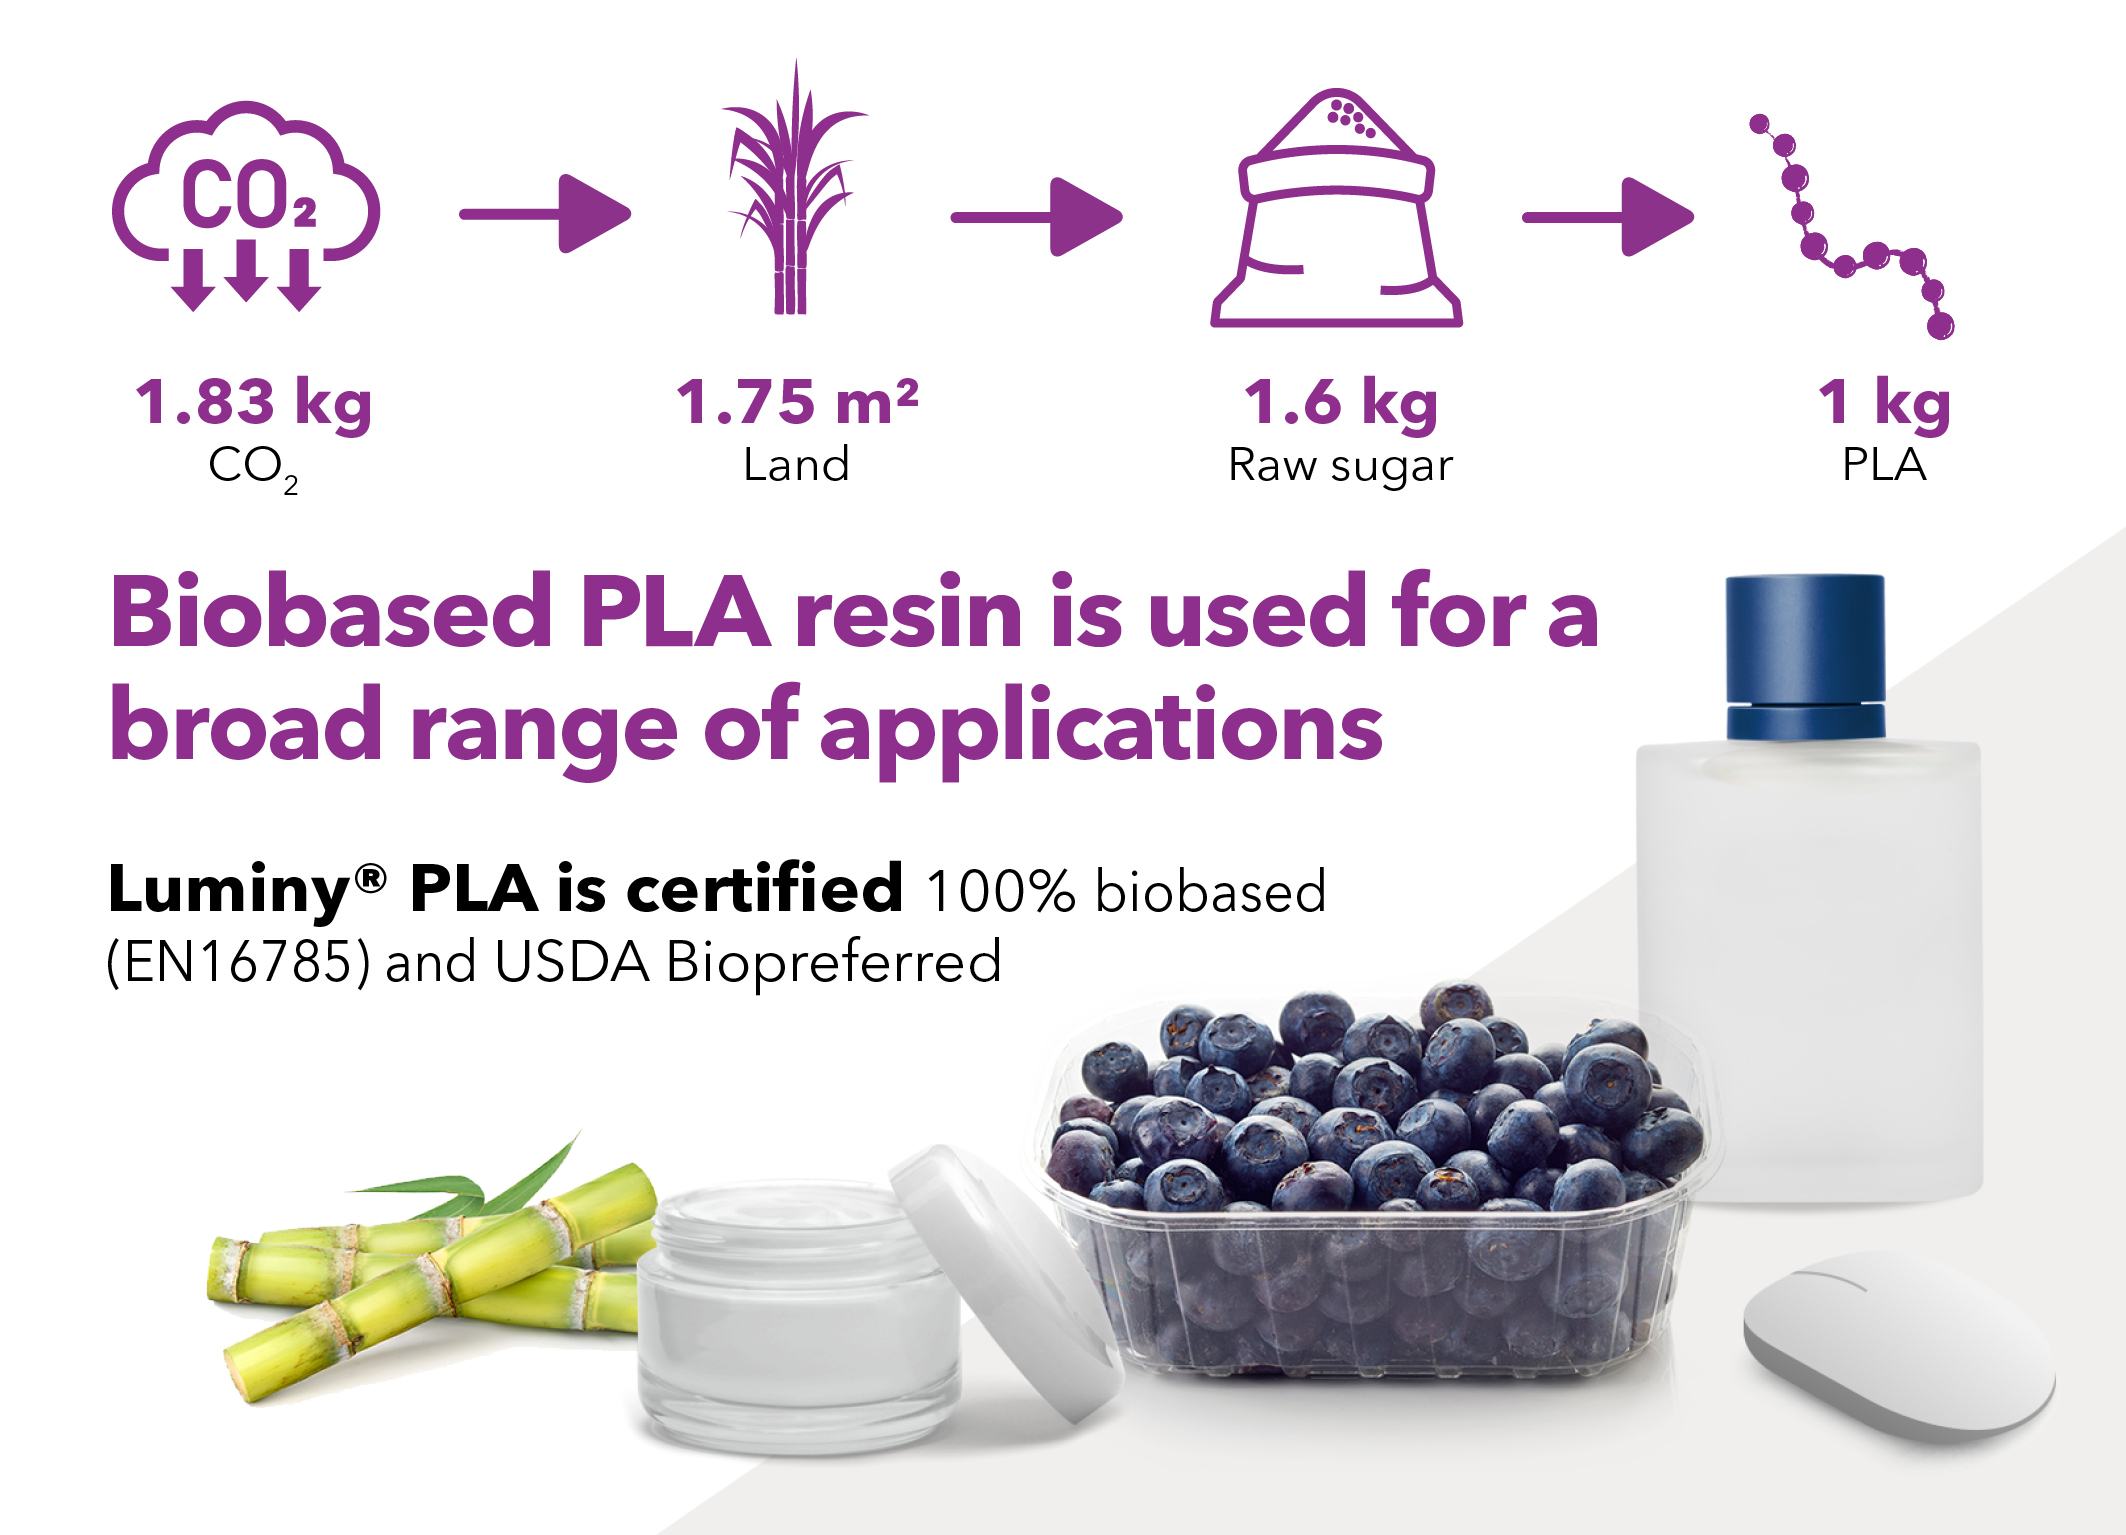 Image from the infographic Planting the future with PLA - A 100% biobased plastic